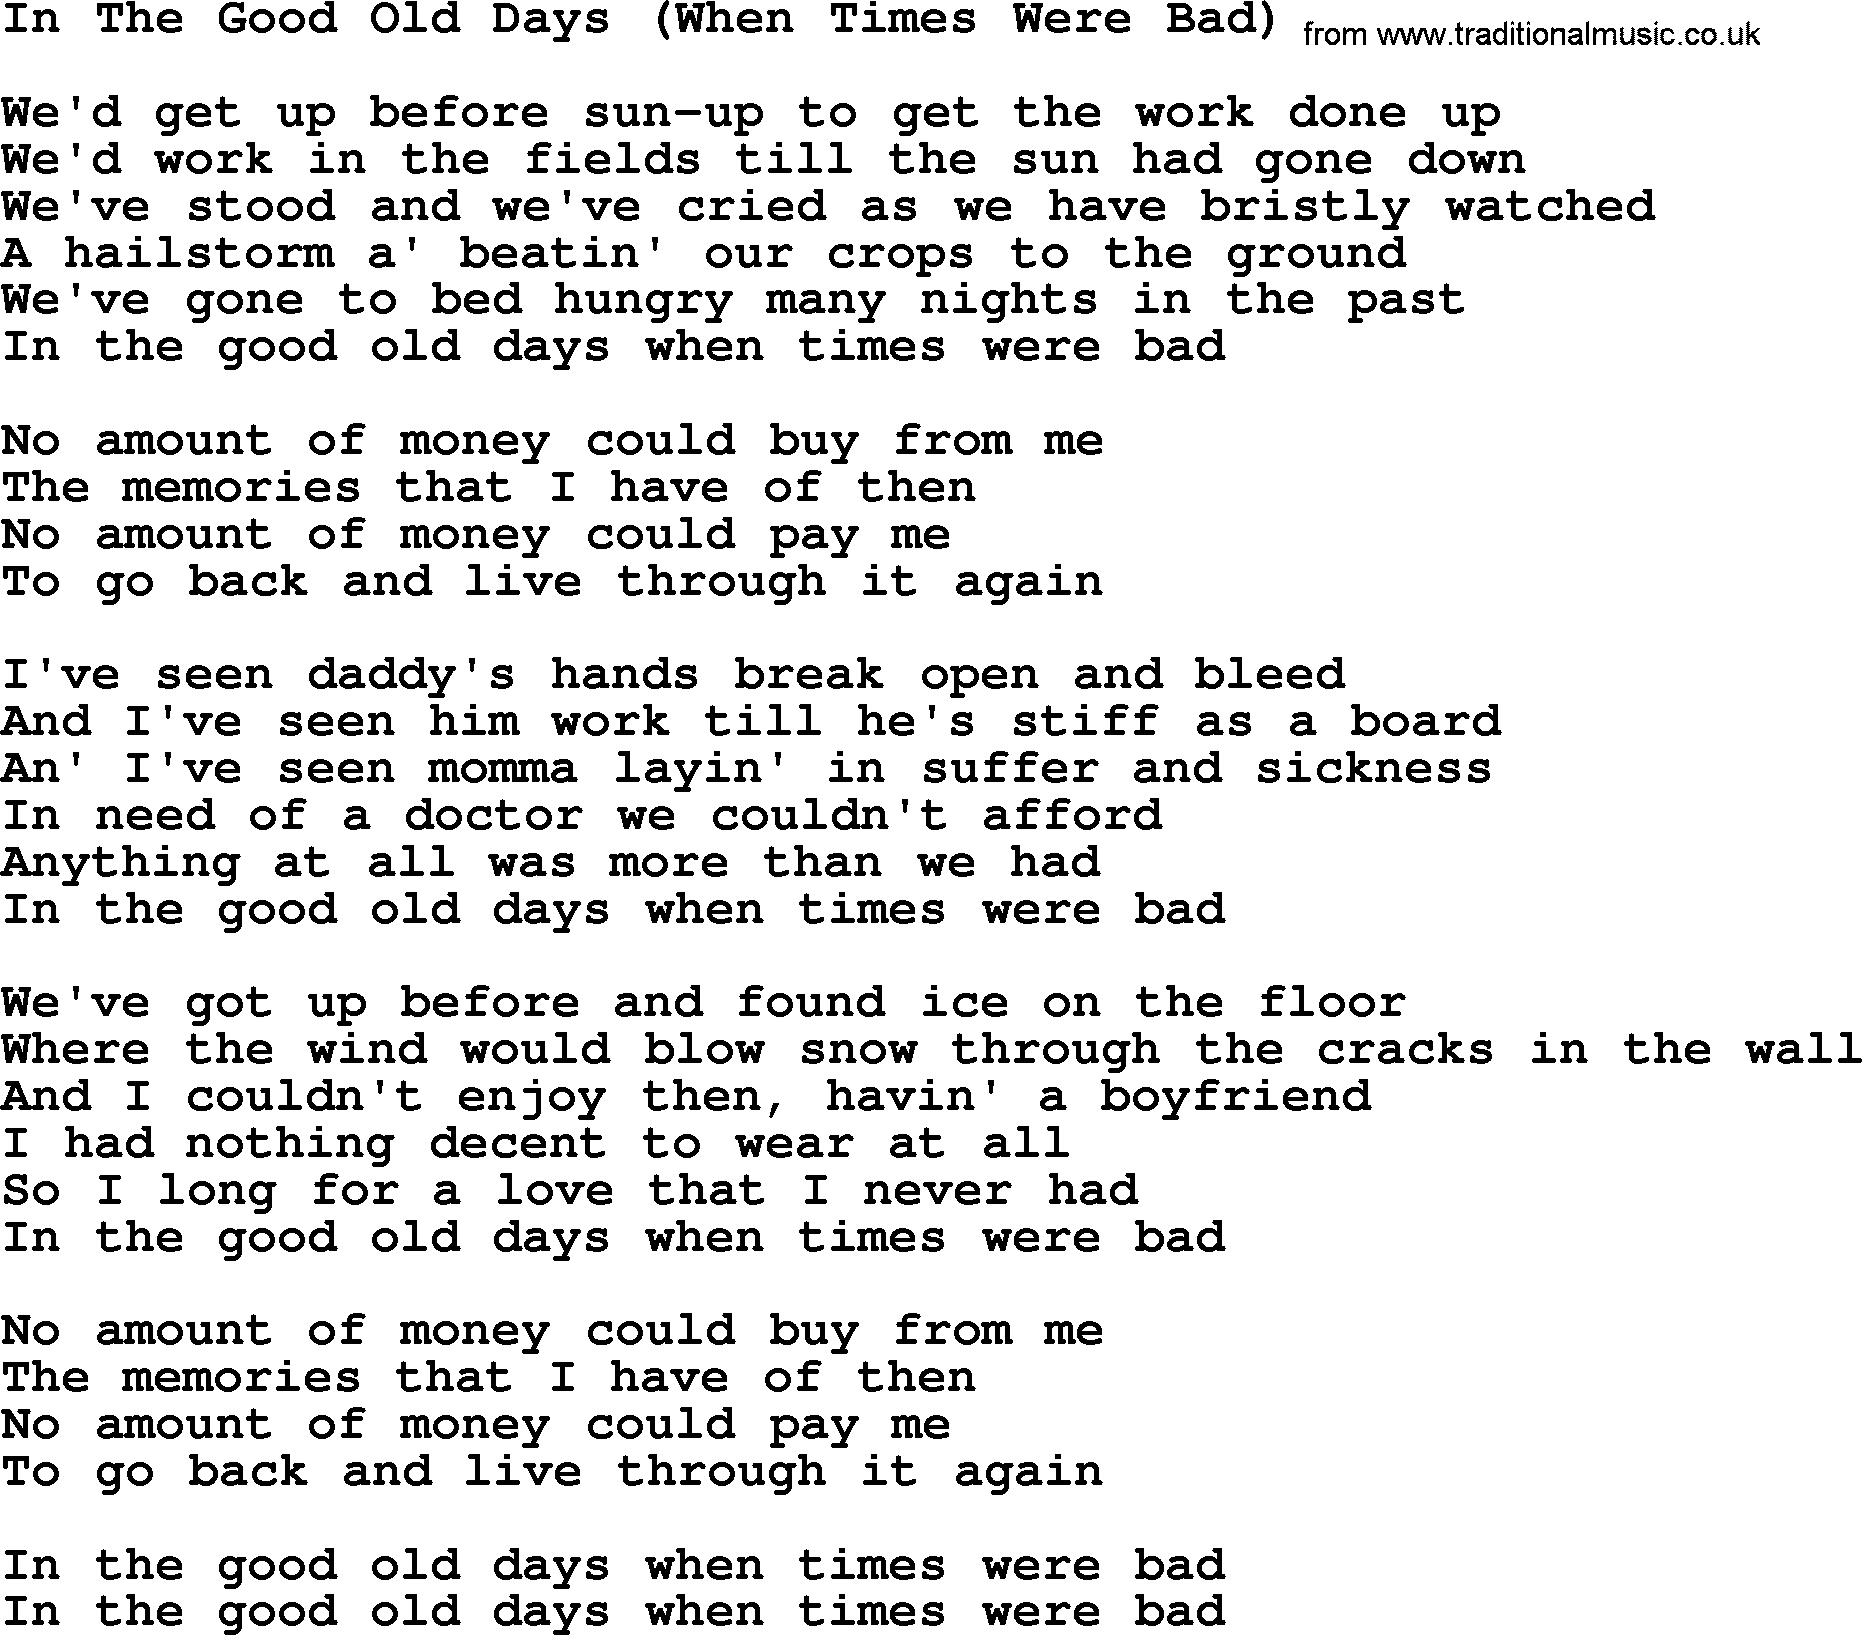 Dolly Parton song In The Good Old Days (When Times Were Bad).txt lyrics